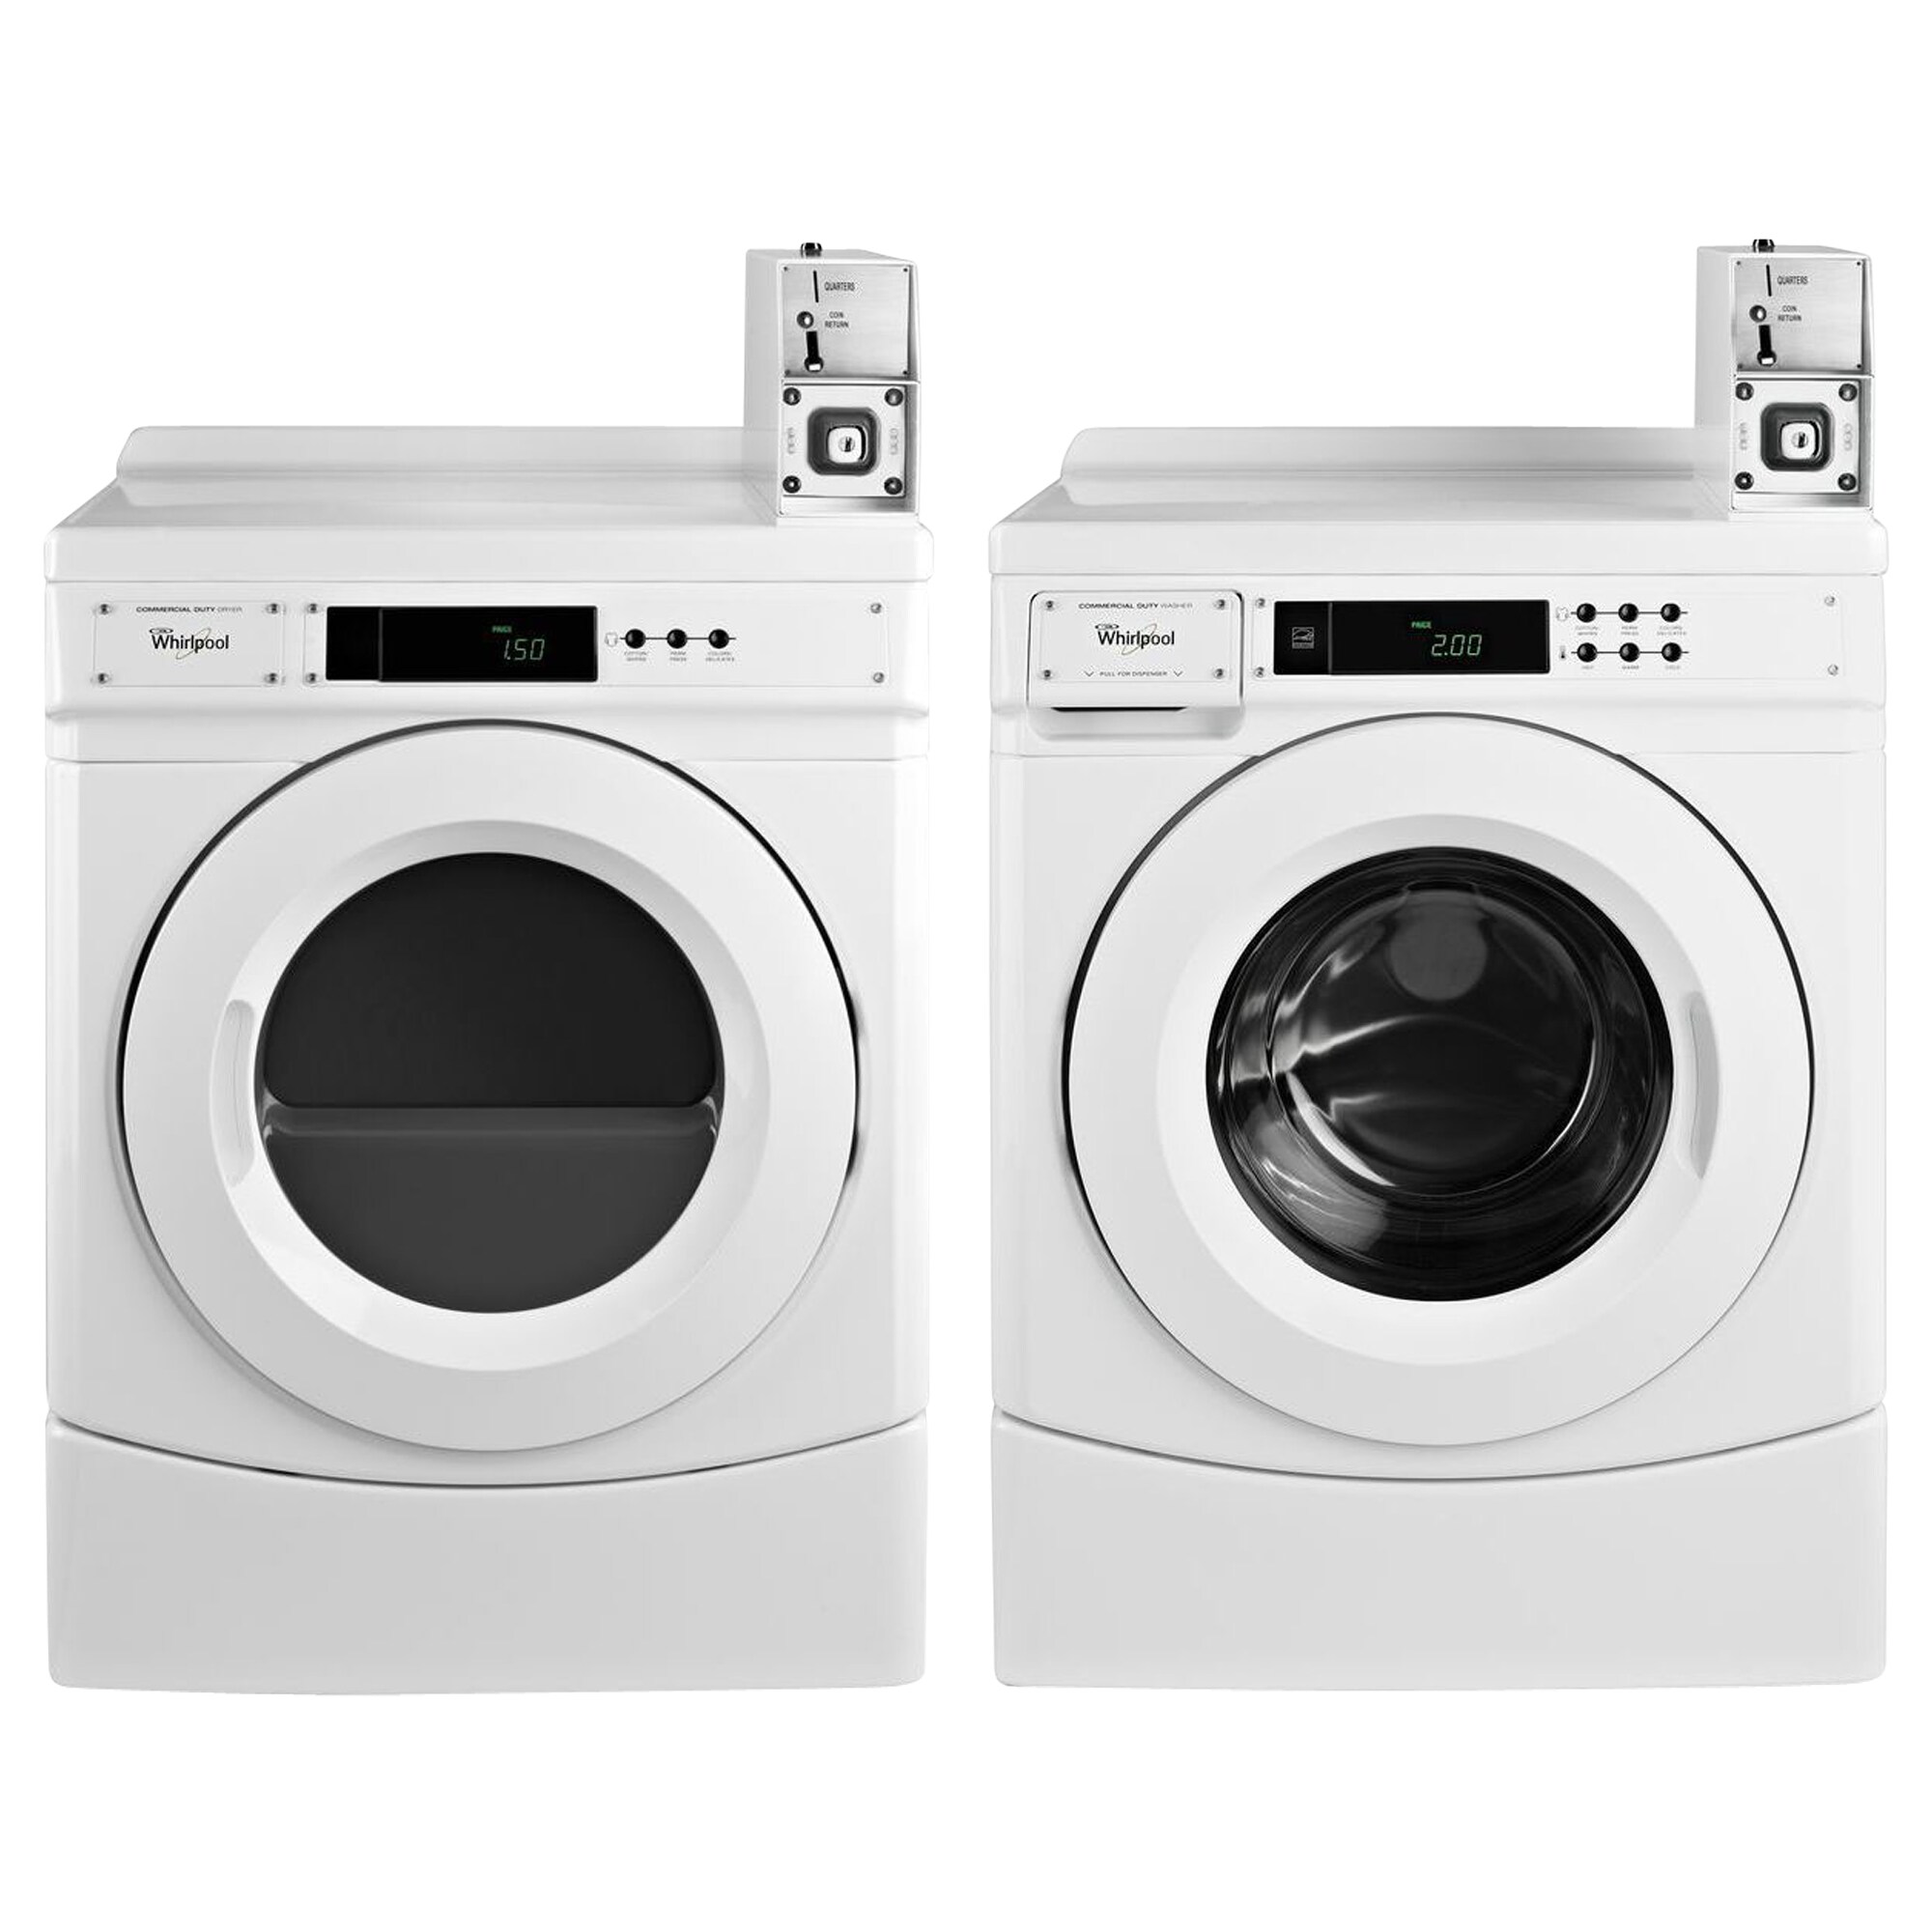 ADA Compliant Washer Dryer Sets At Lowes